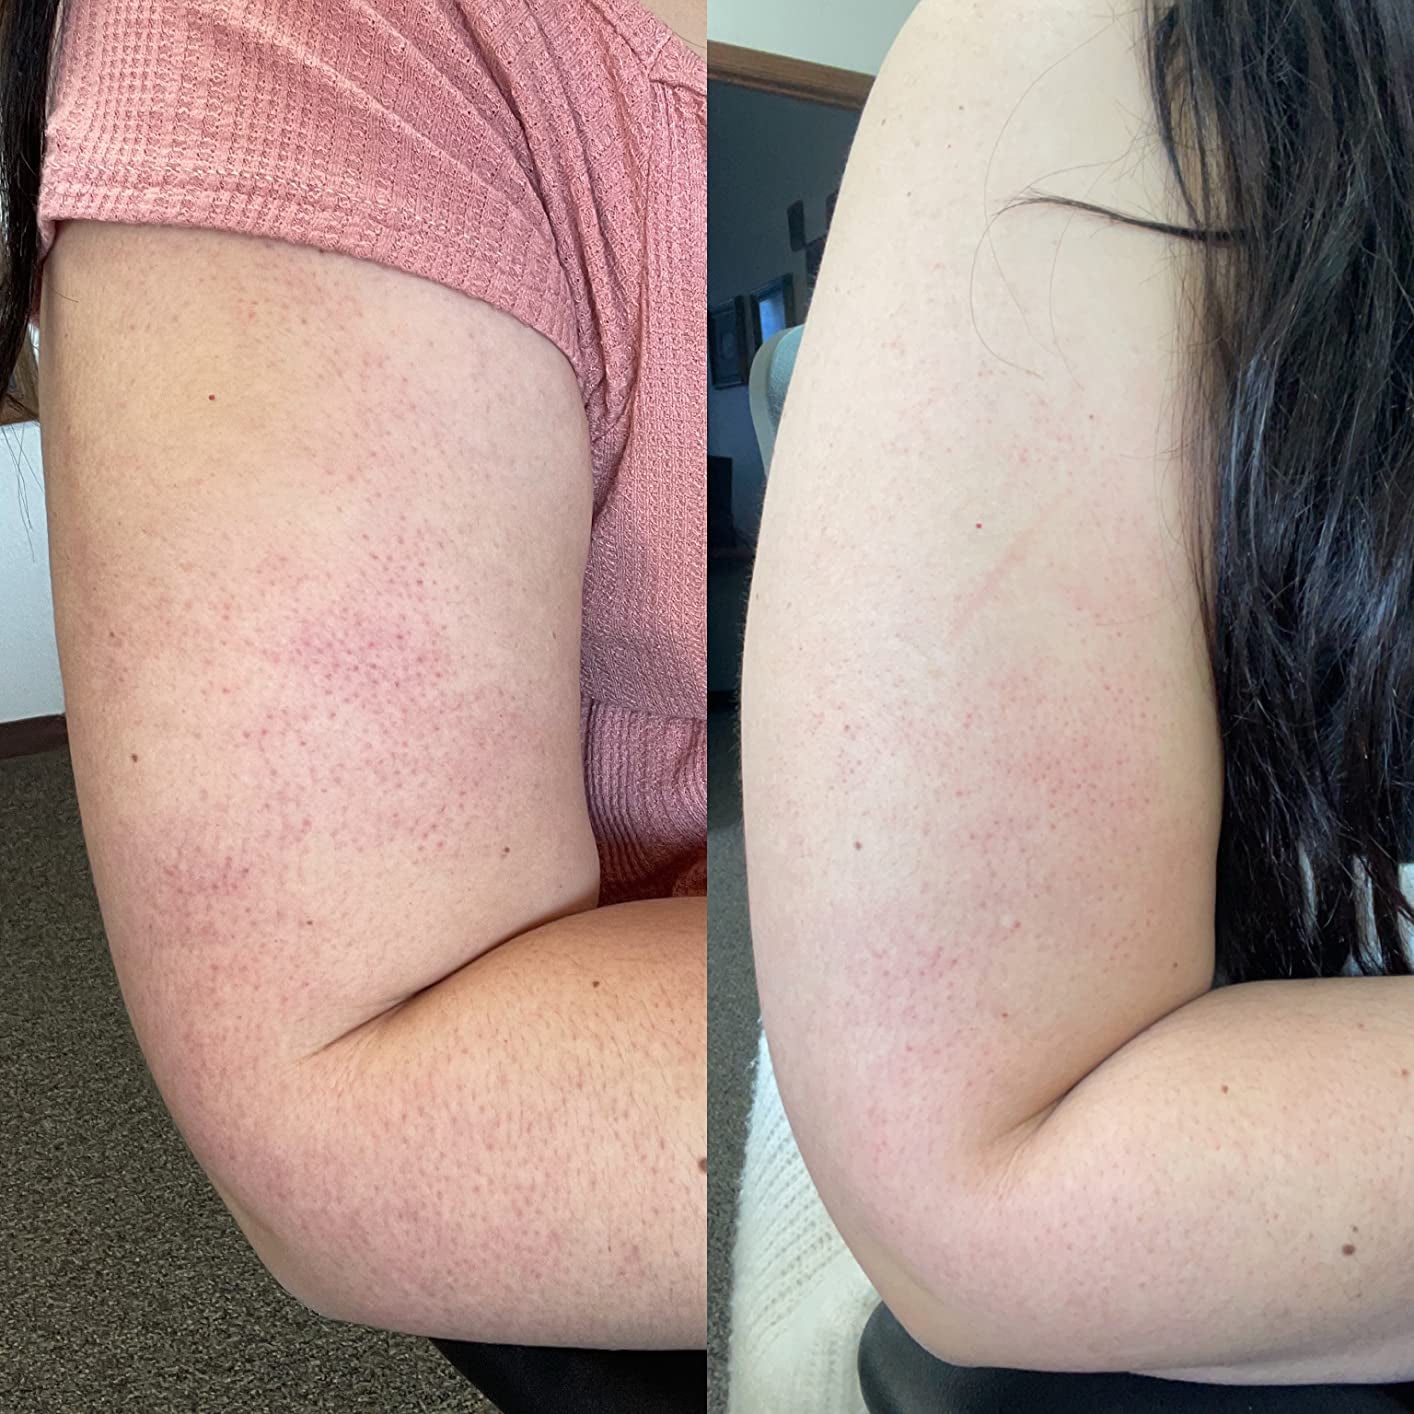 on left: reviewer pic of arm covered in little red bumps. on right, reviewer pic of same arm with less red bumps after using the KP body scrub